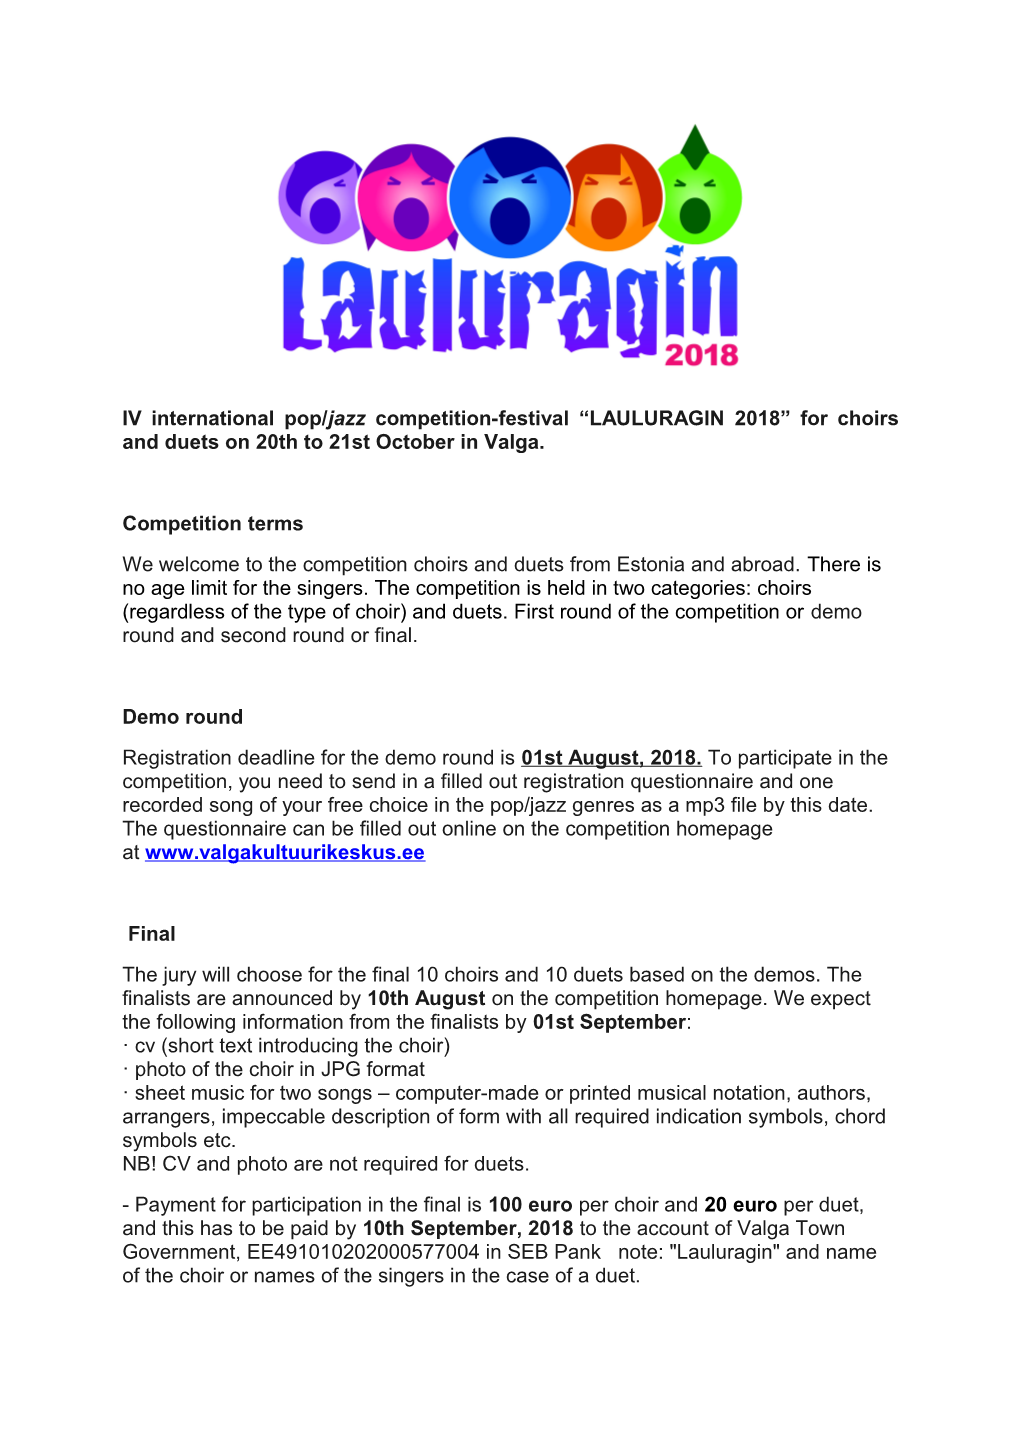 IV International Pop/Jazz Competition-Festival LAULURAGIN 2018 for Choirs and Duets On